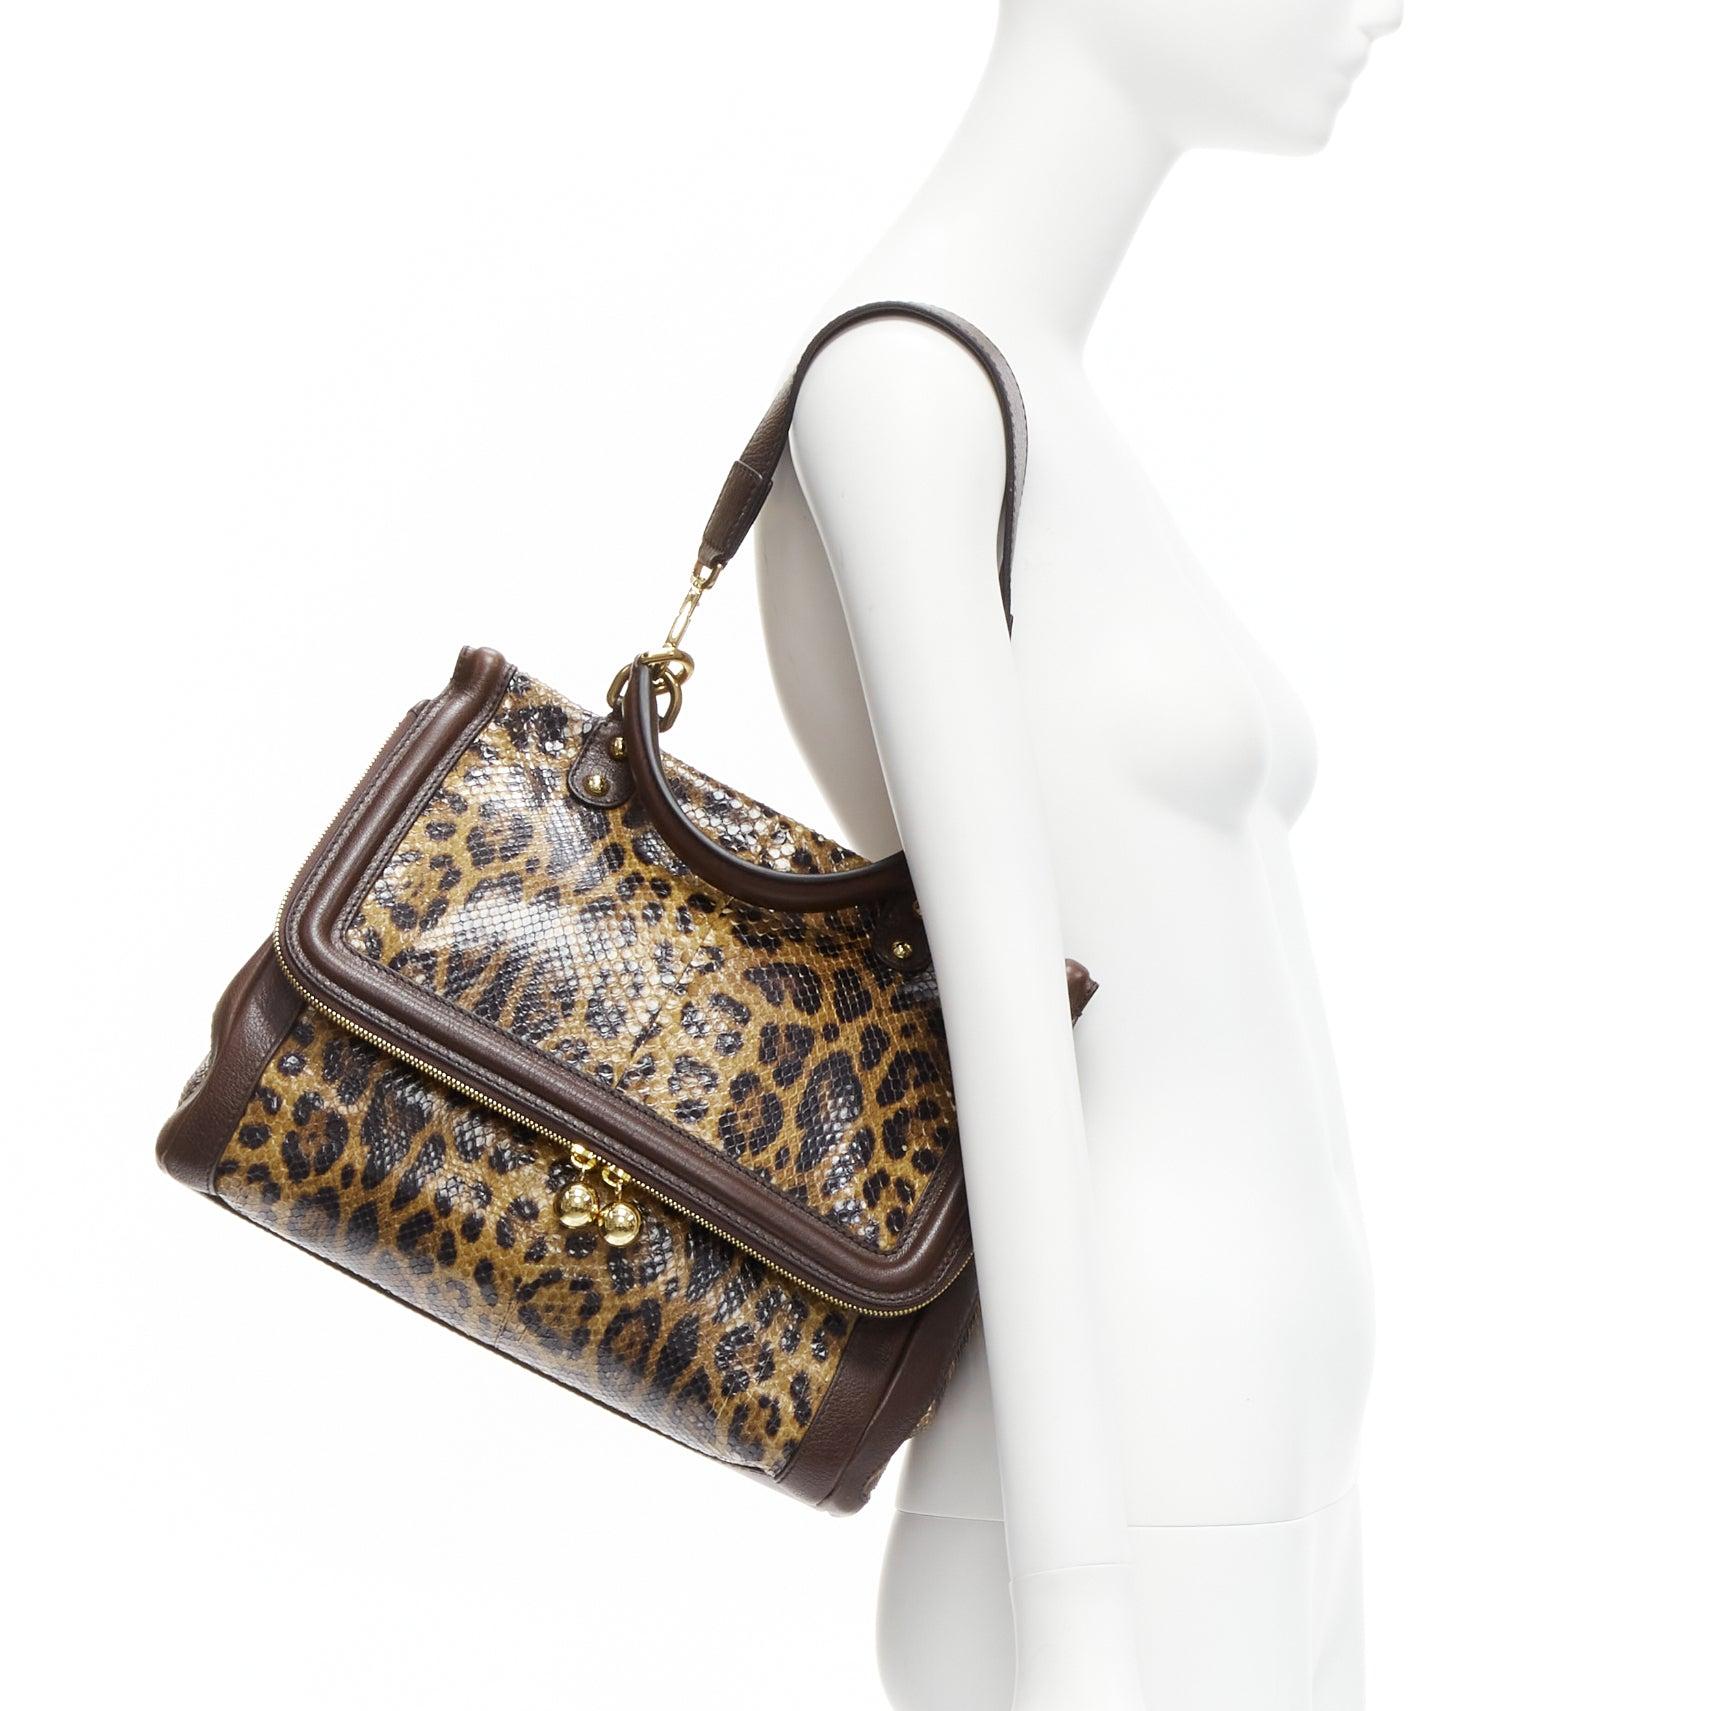 DOLCE GABBANA Sicily brown leopard print scaled leather satchel bag
Reference: TGAS/D00694
Brand: Dolce Gabbana
Designer: Domenico Dolce and Stefano Gabbana
Model: Sicily
Material: Leather
Color: Brown, Multicolour
Pattern: Animal Print
Closure: